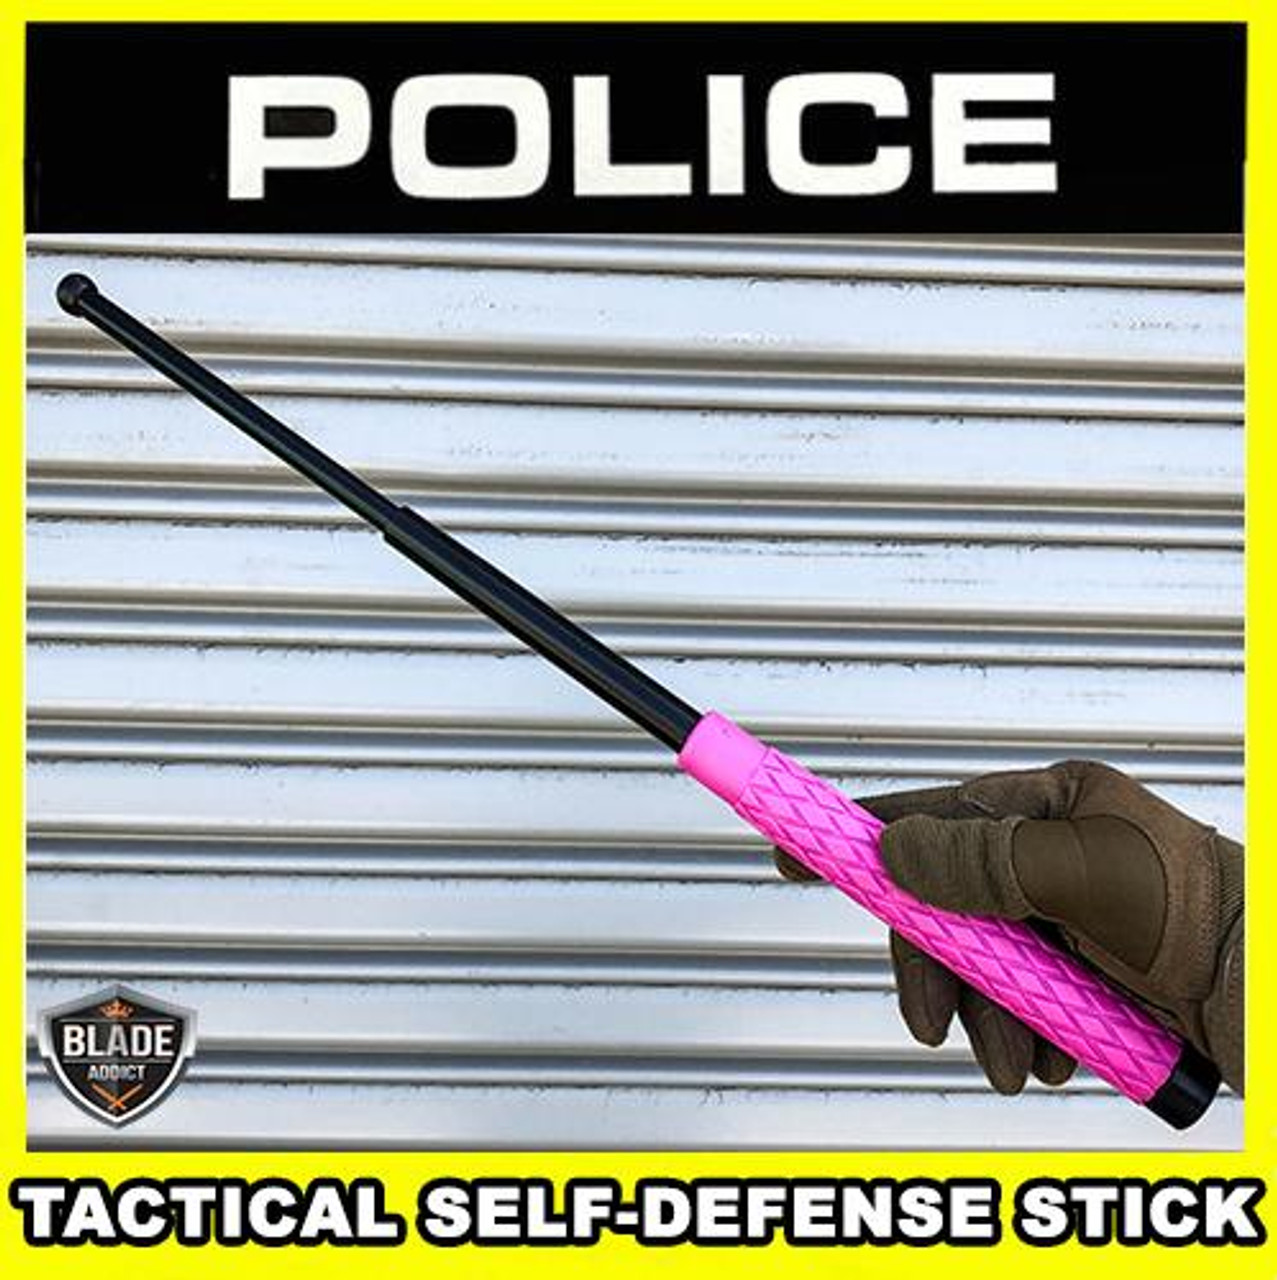 21 or 26 Solid Steel Tactical Expandable Baton Stick Self